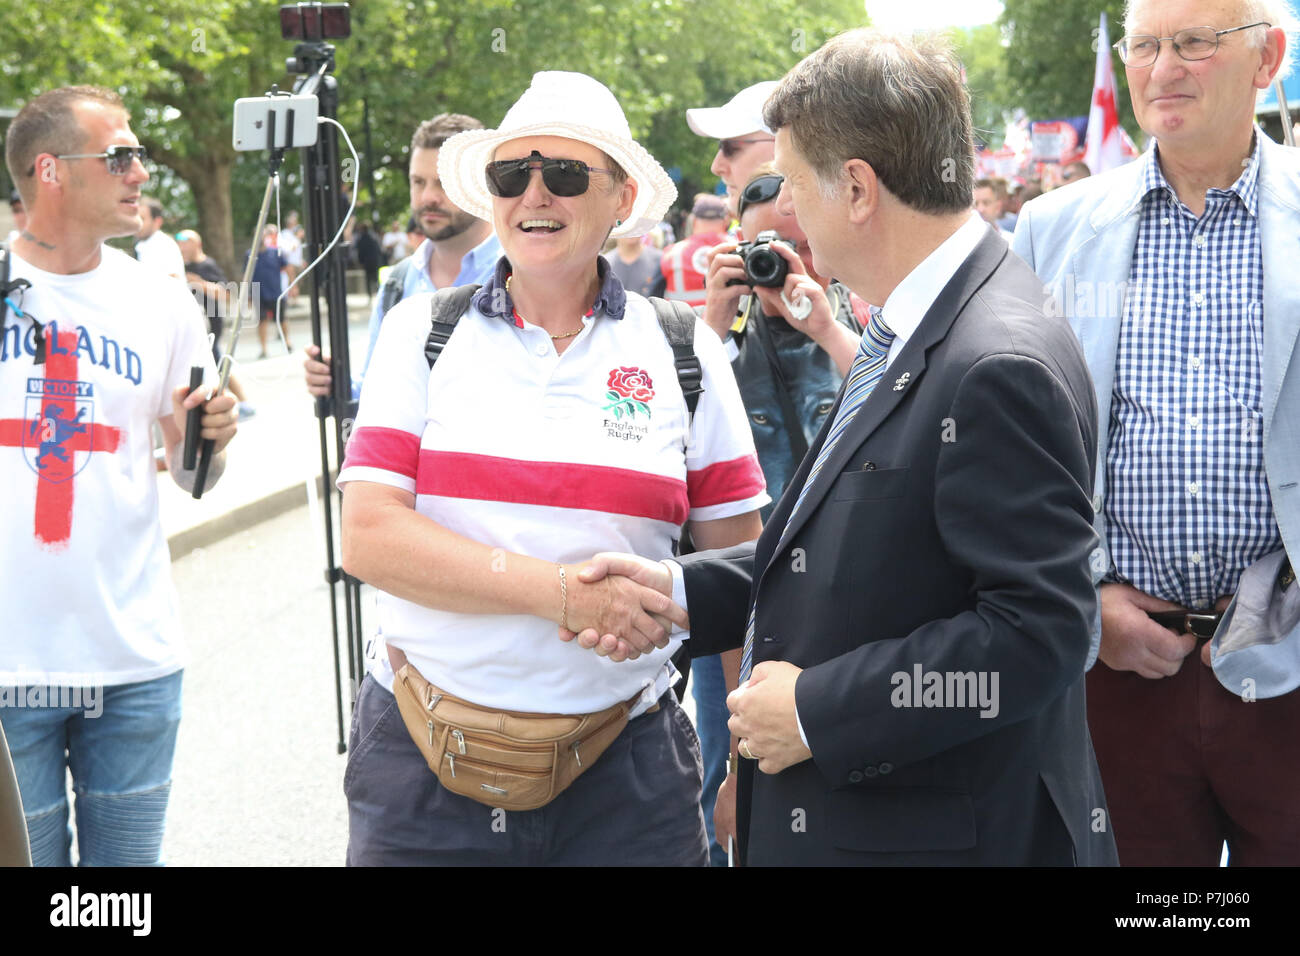 London, England. 23rd June 2018. Pictured: Anne Marie Waters, Leader For Britain Party and Gerard Batten, MEP & UKIP Leader shake hands as they meet o Stock Photo